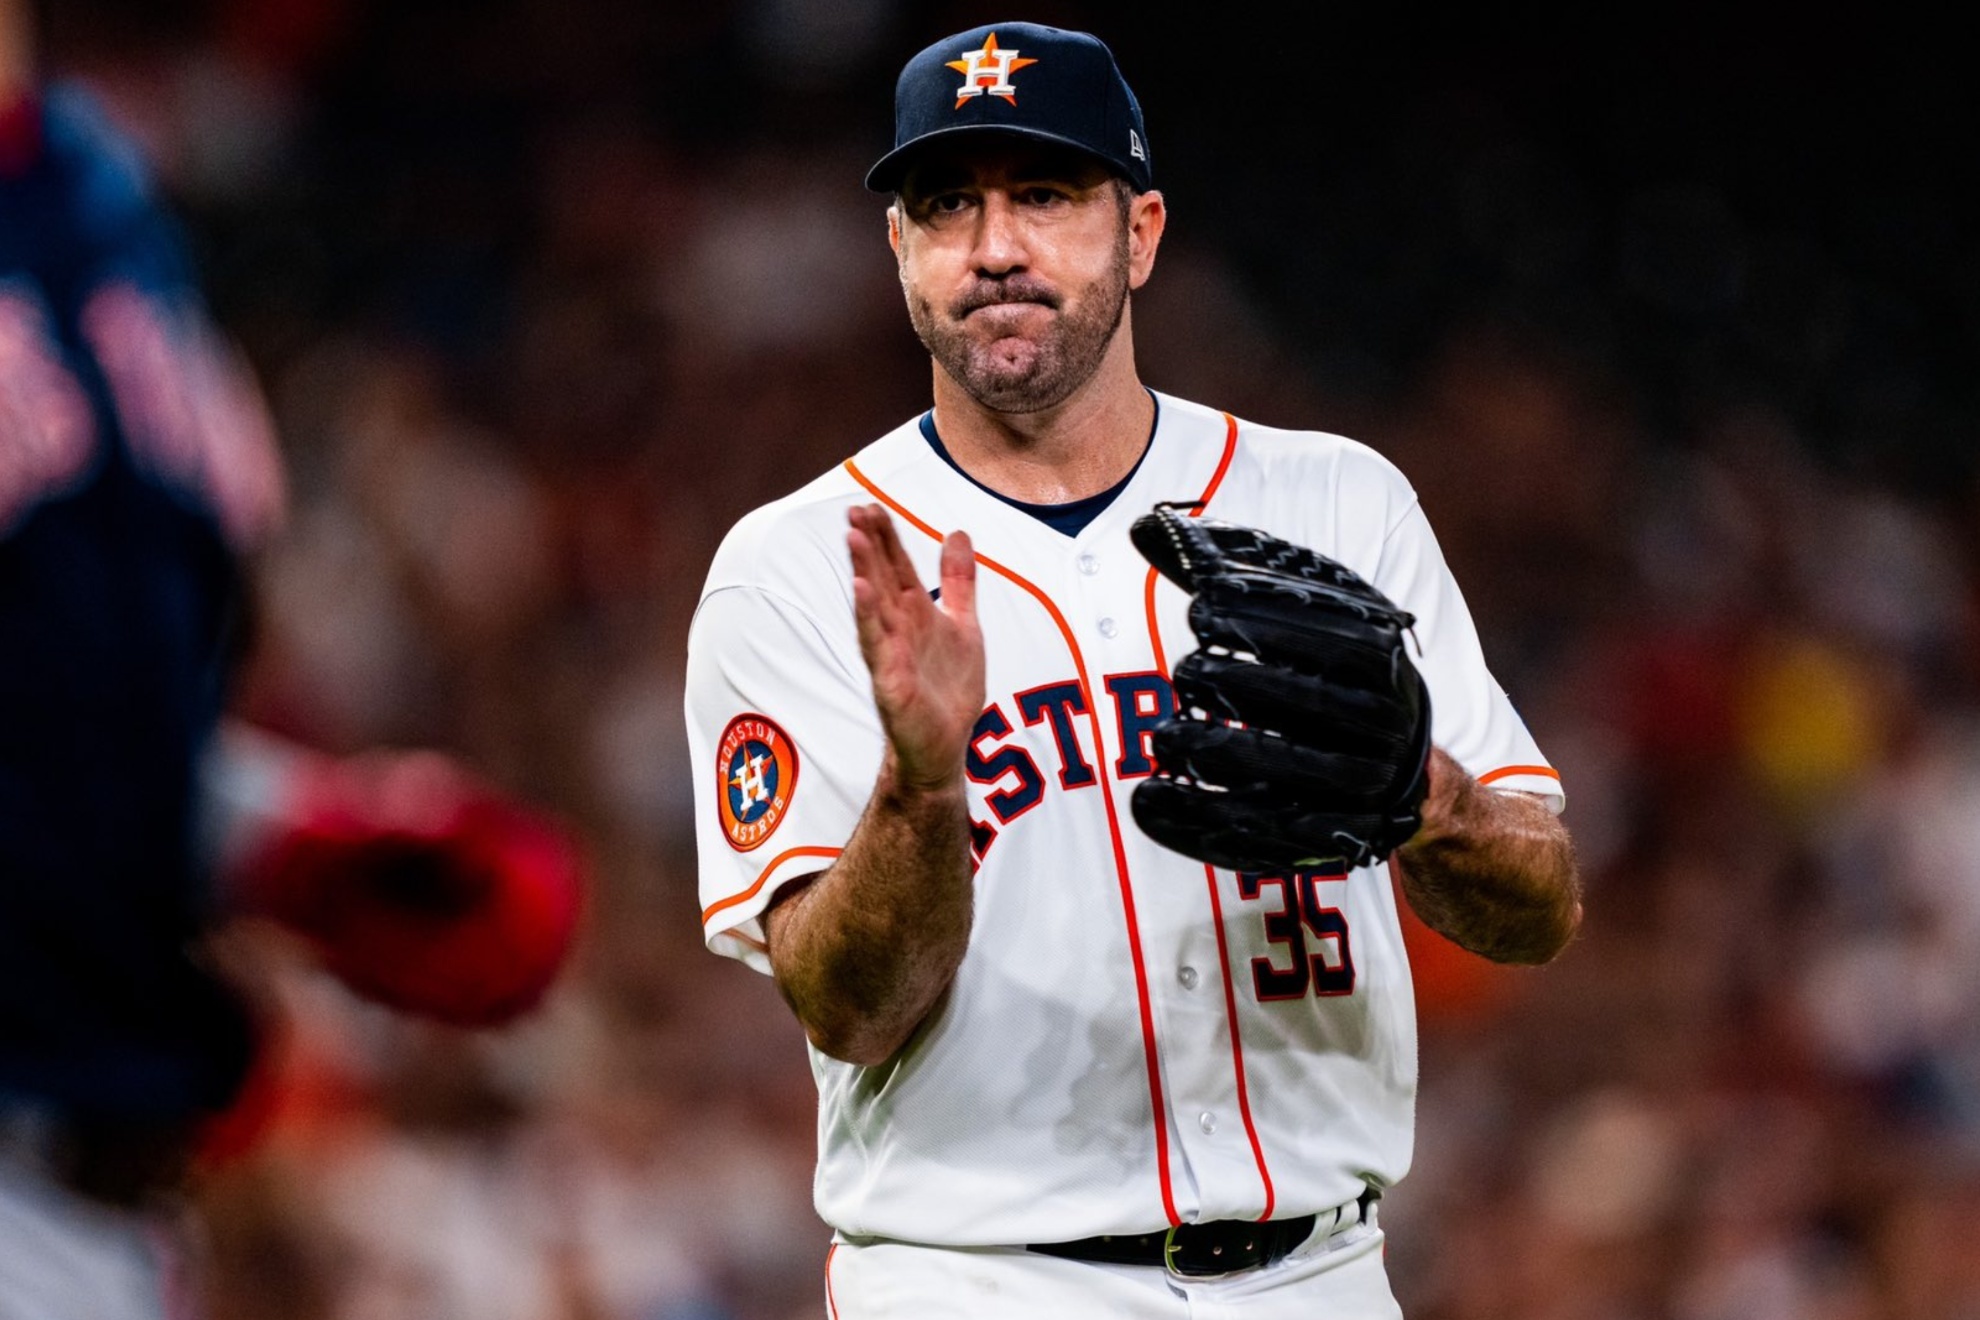 The Astros star made headlines after using foul language on Red Sox manager Alex Cora